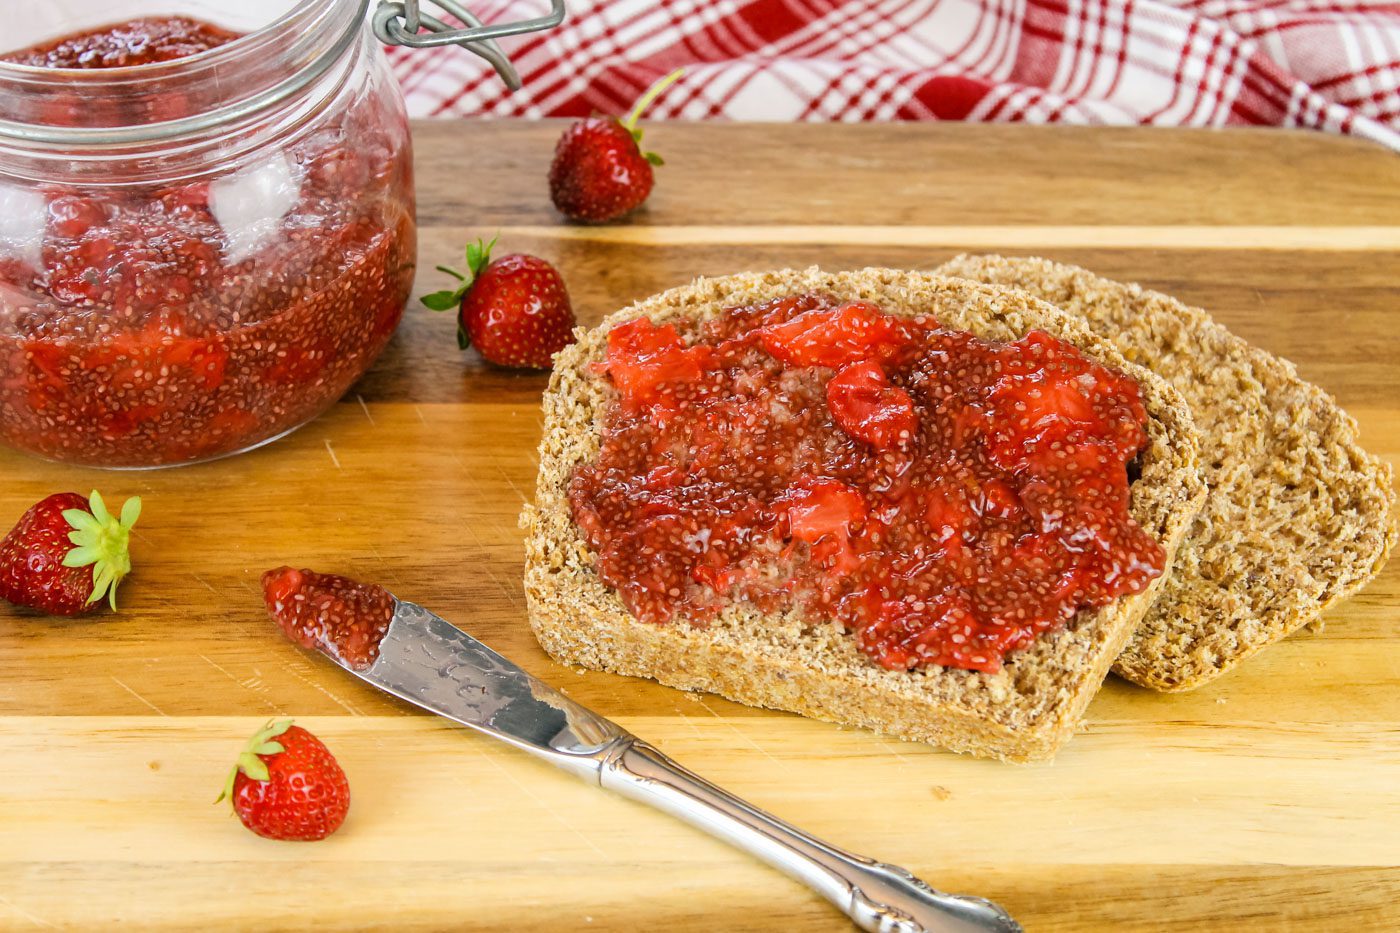 a slice of bread covered in jam sit next to fresh strawberries and a jar of chia seed jam